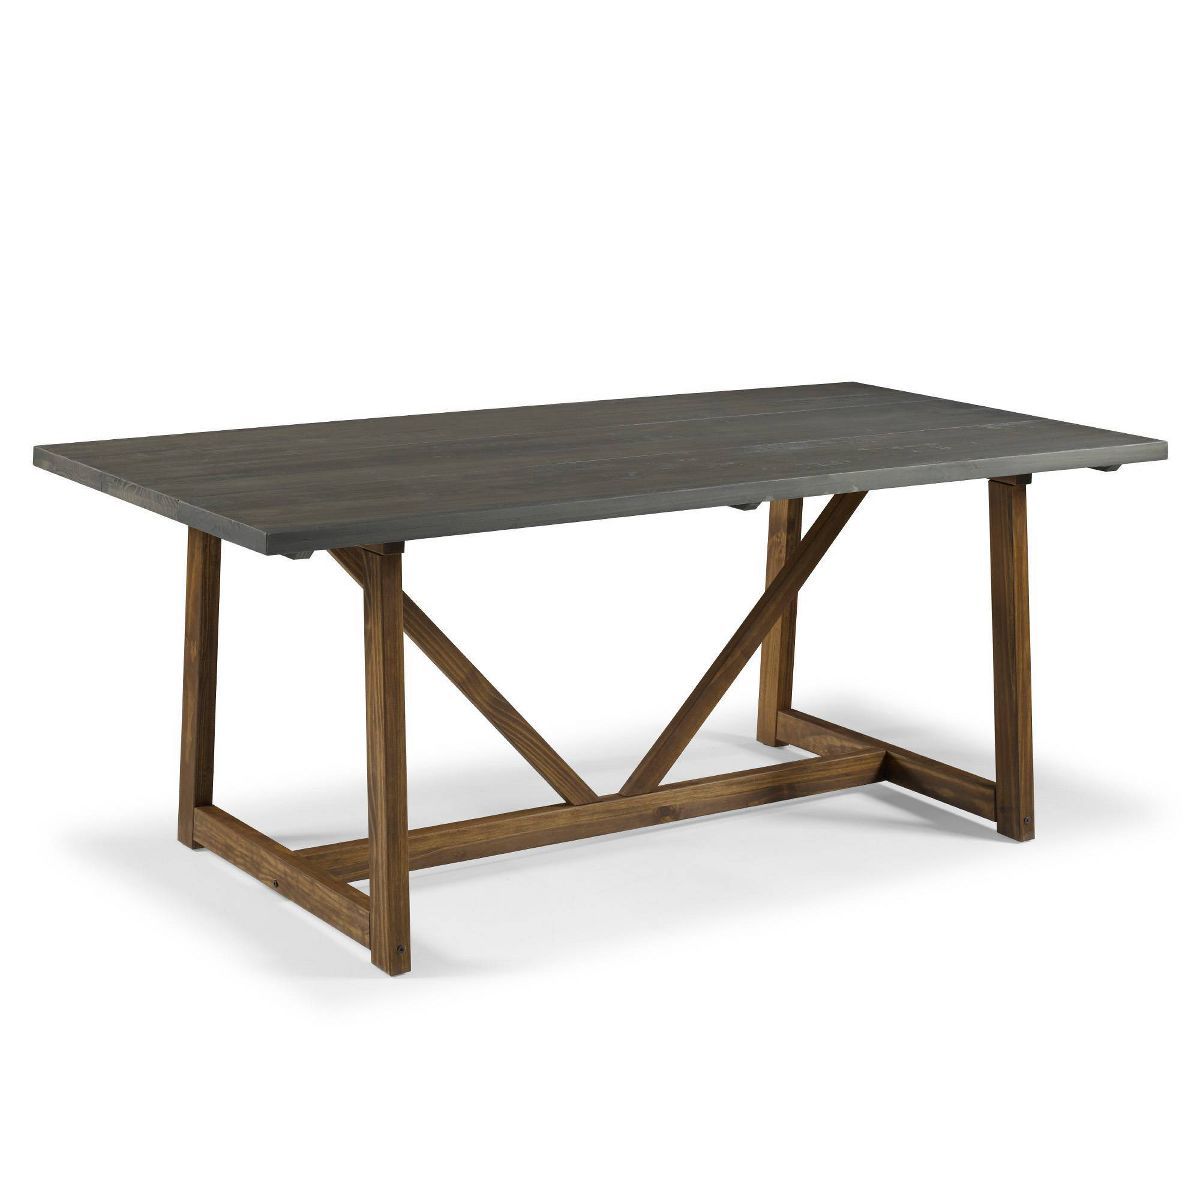 72" Solid Wood Trestle Dining Table - Saracina Home | Target